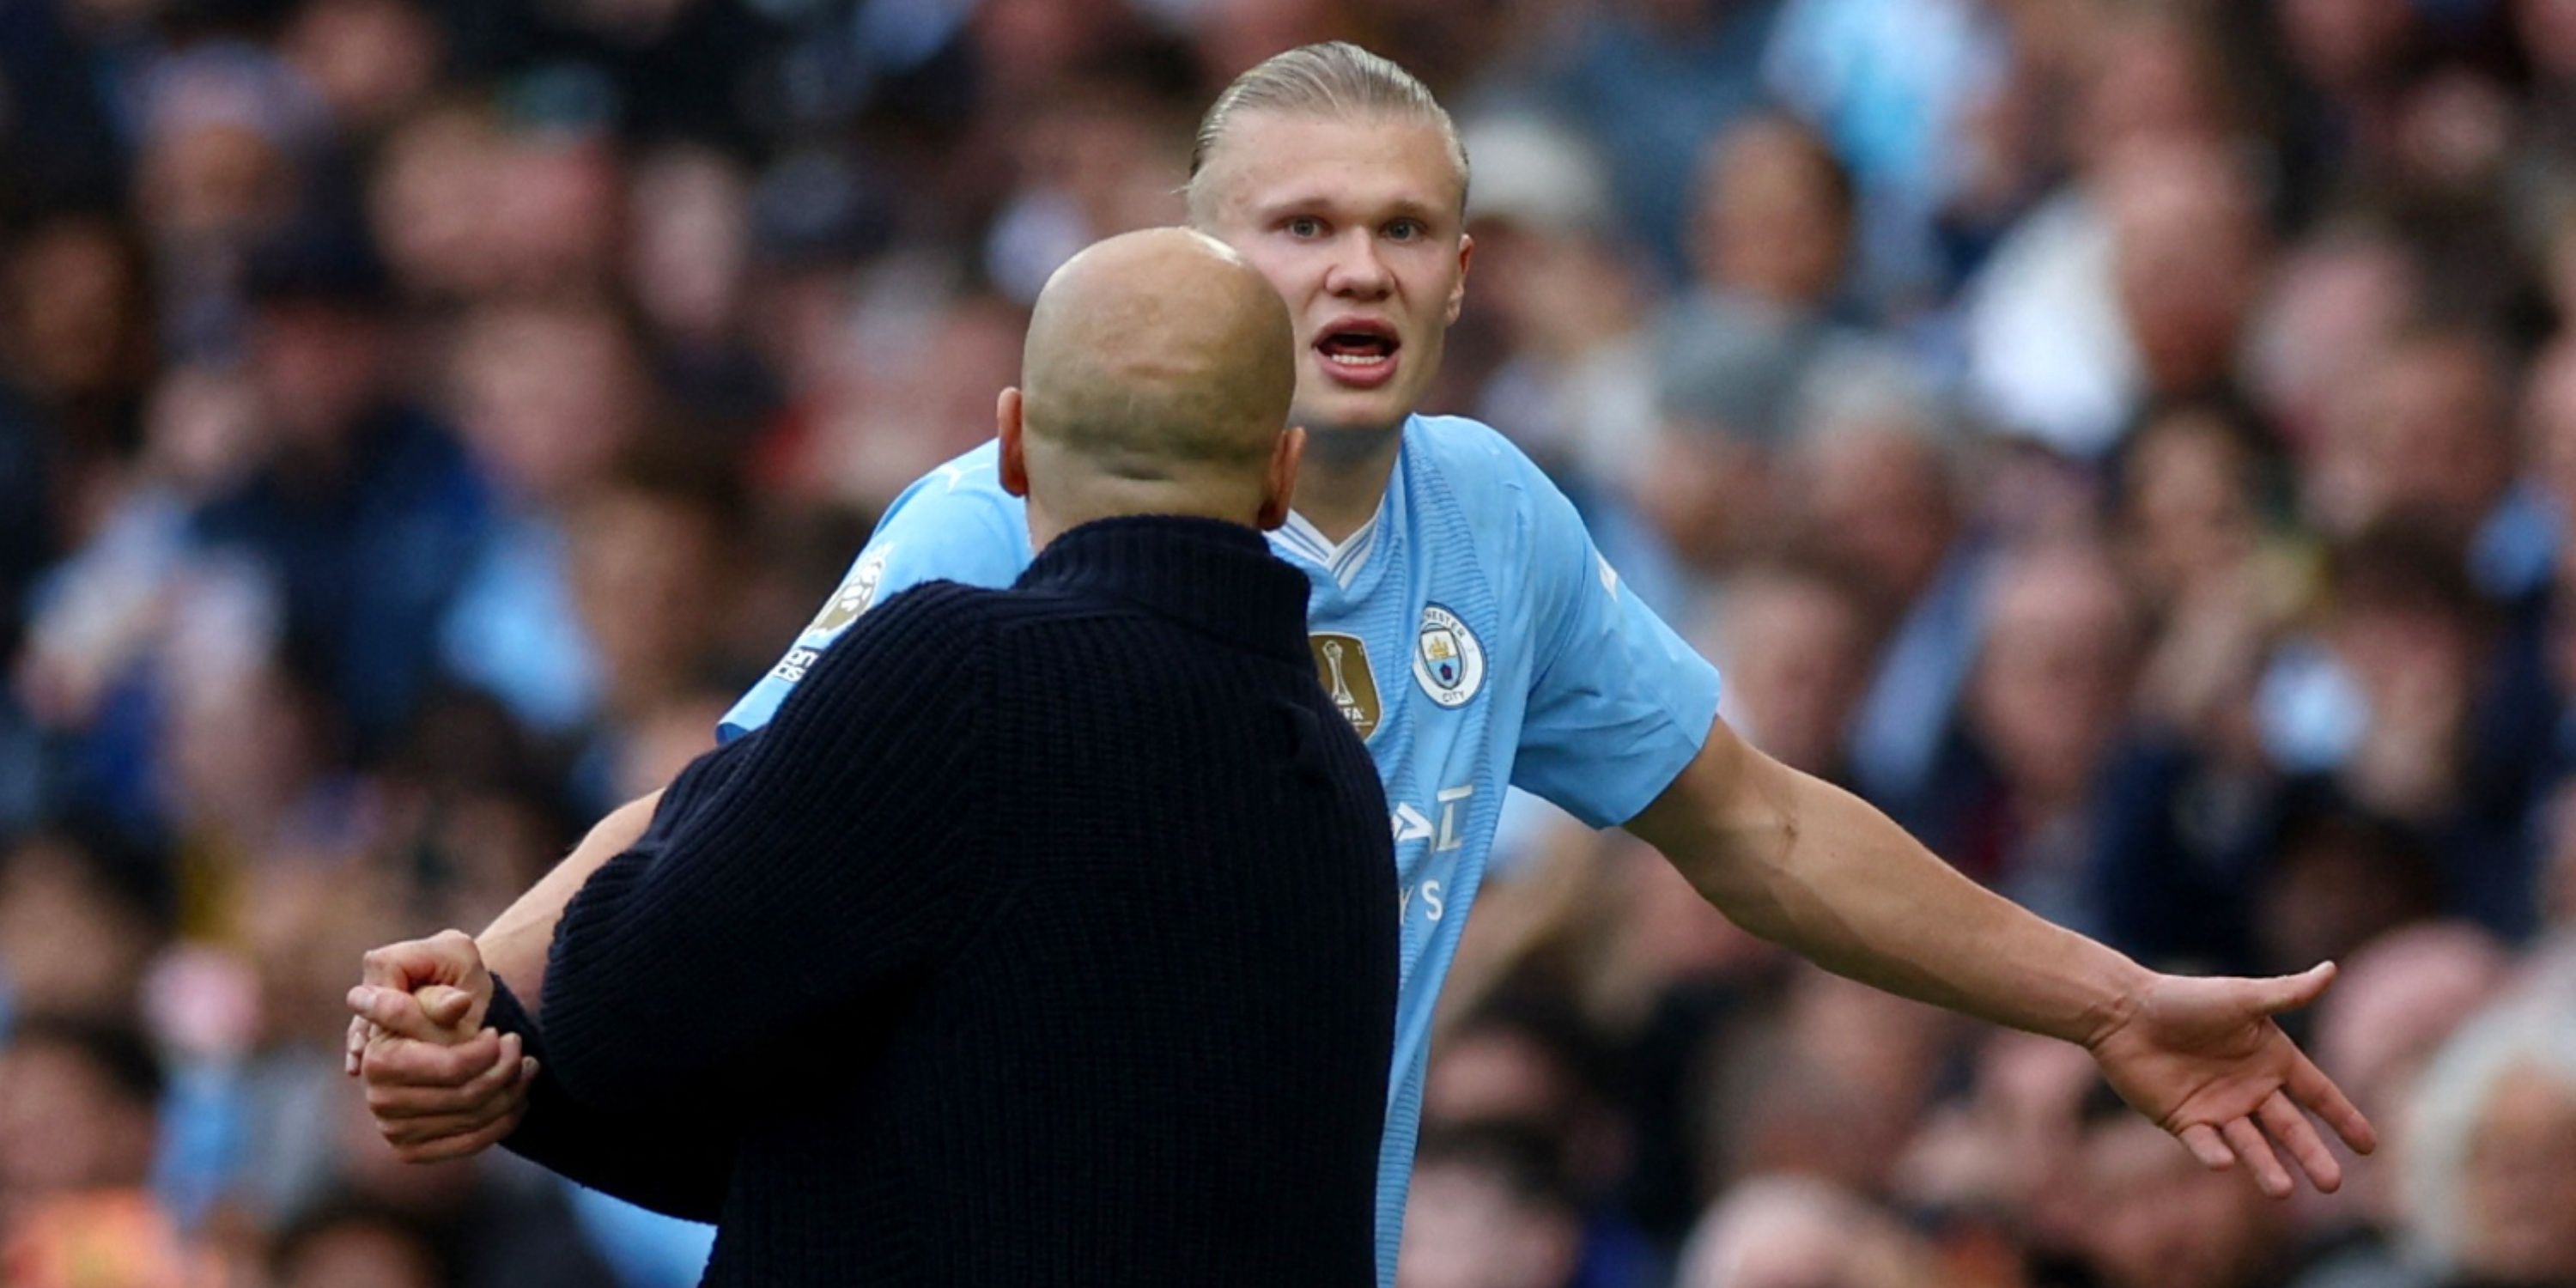 Manchester City's Erling Haaland clashes with manager Pep Guardiola after being substituted